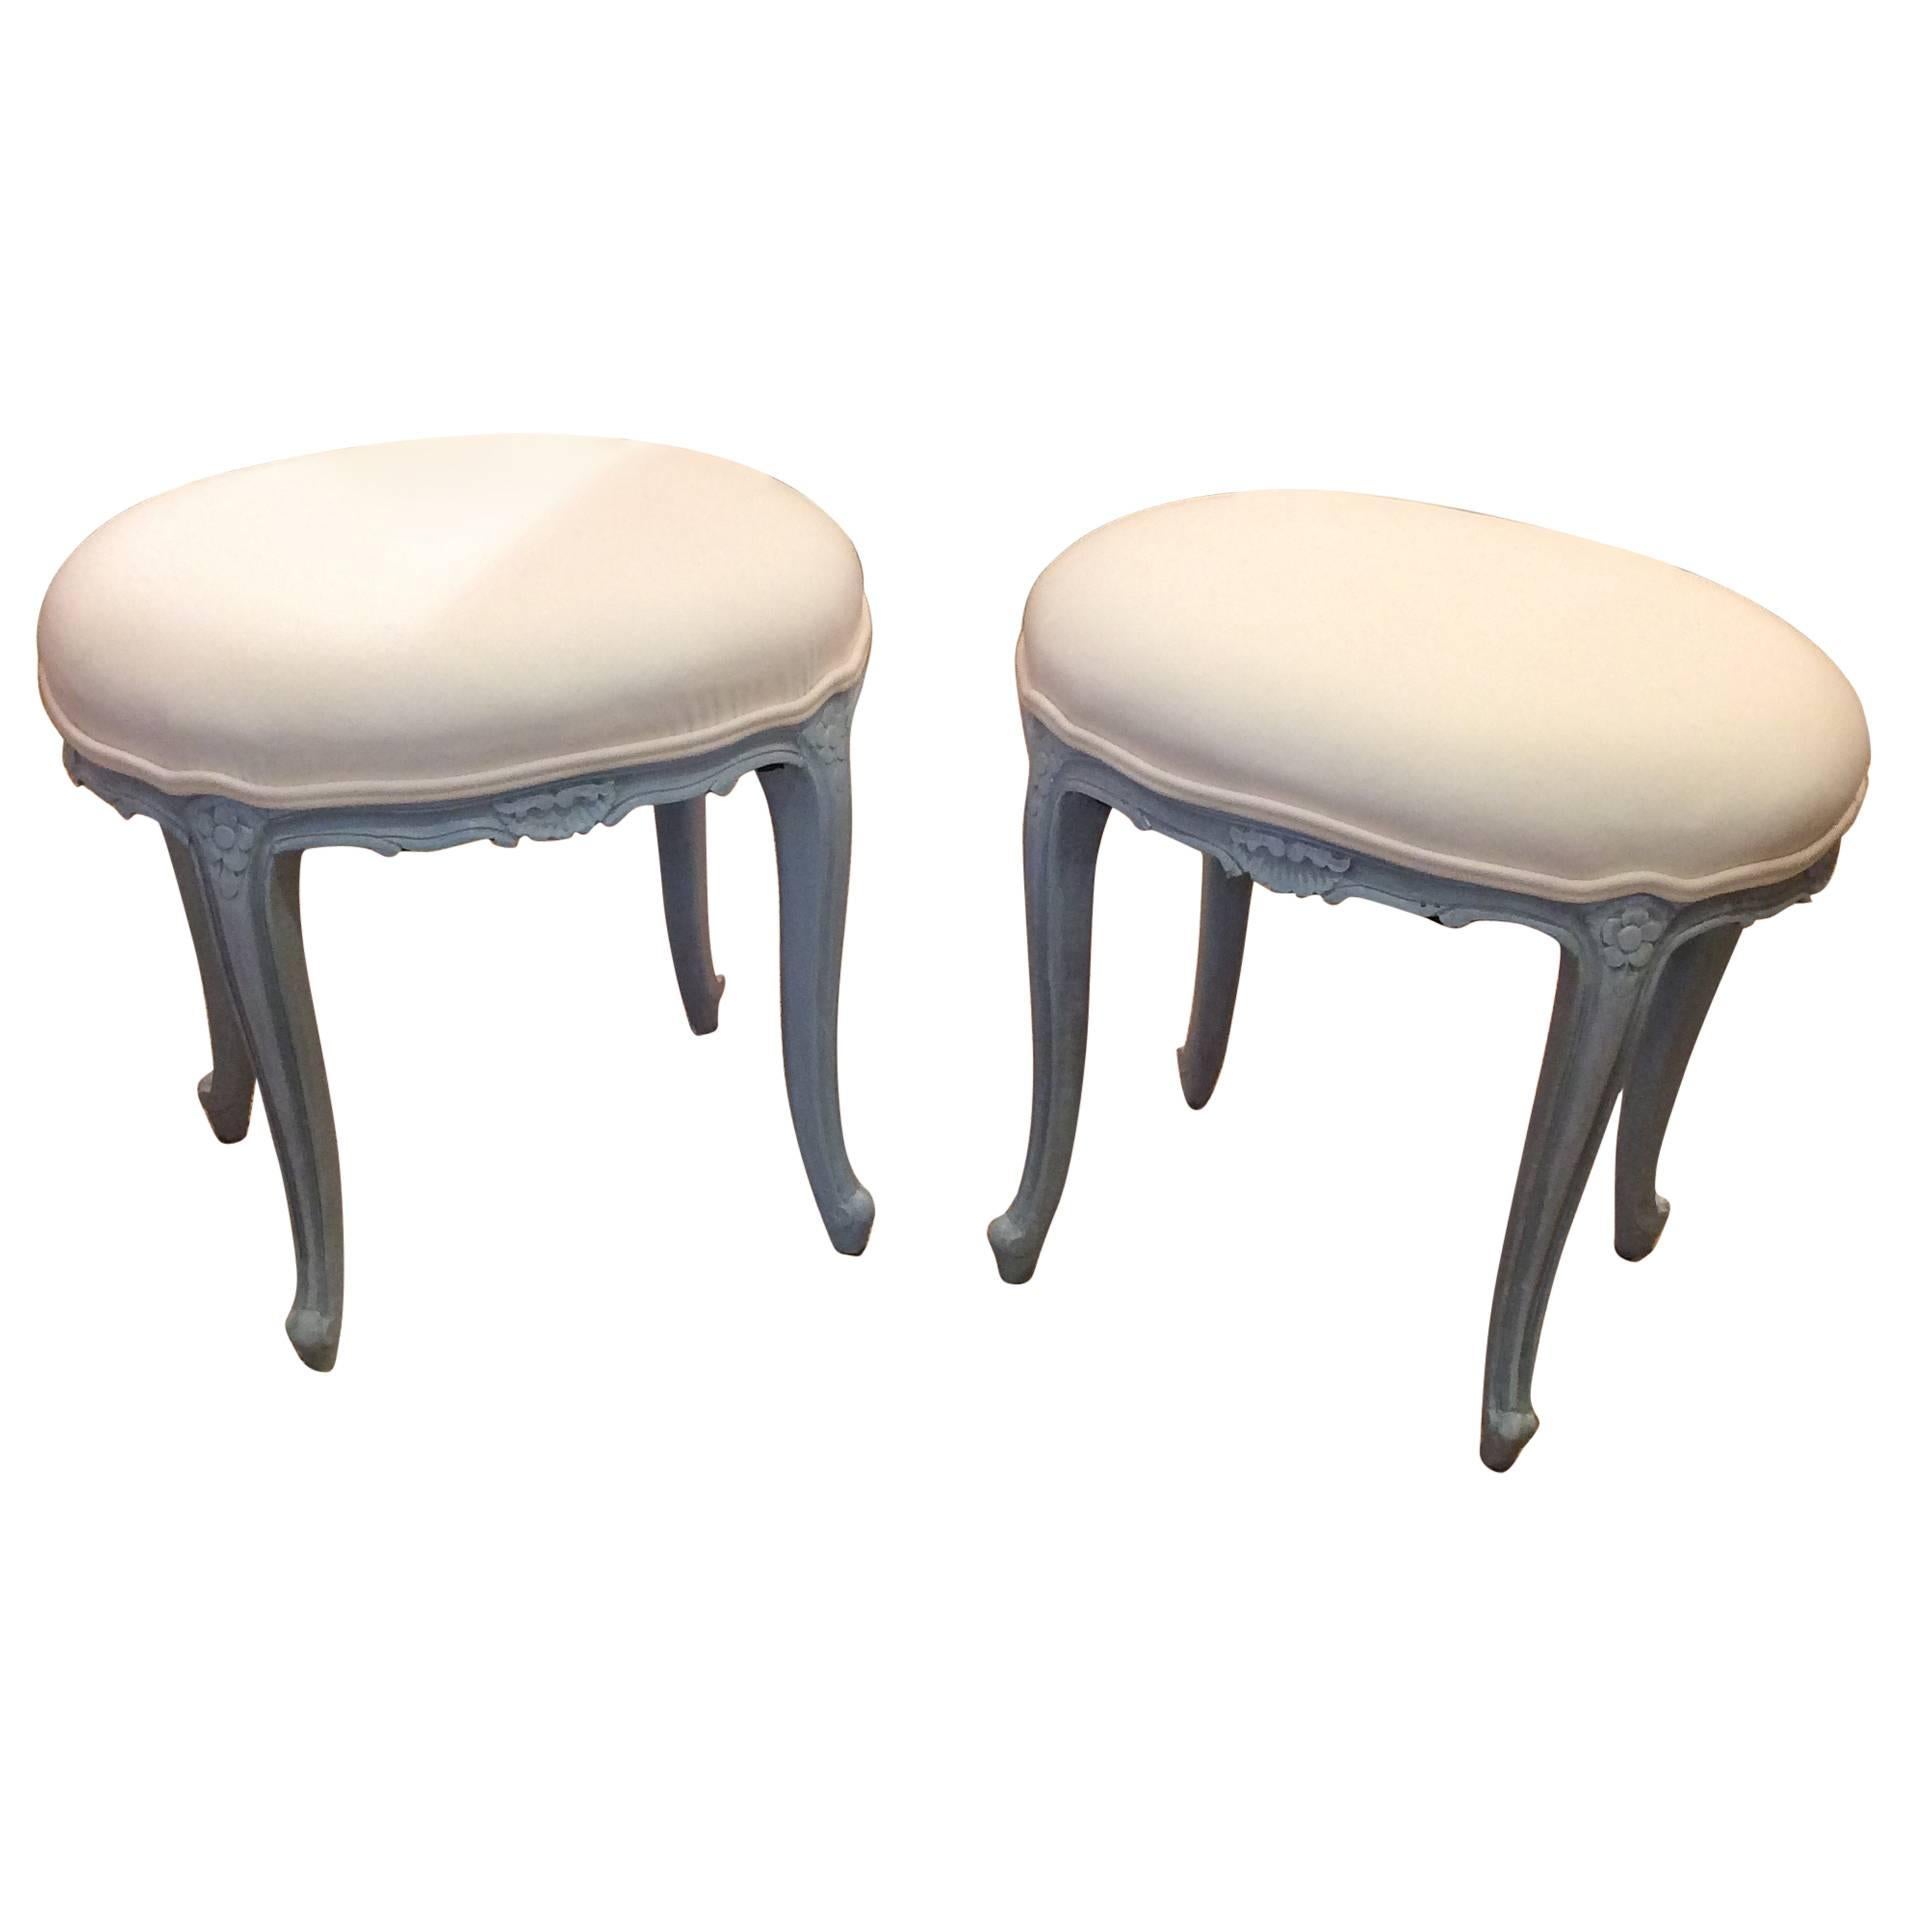 Very Pretty Pair of French Oval Stools Ottomans